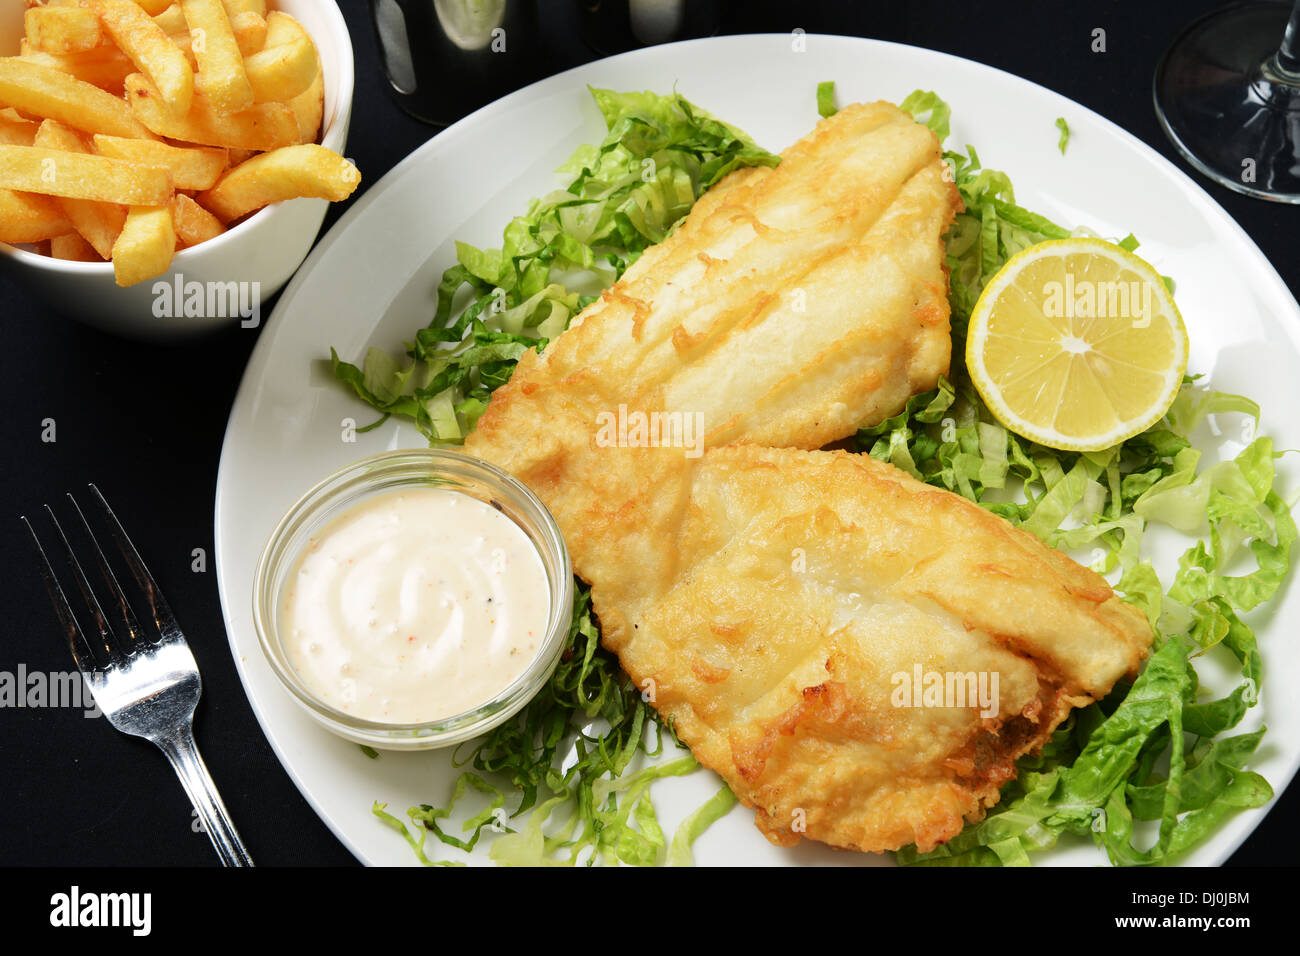 A plate of fried Fish and Chips served on lettuce Stock Photo